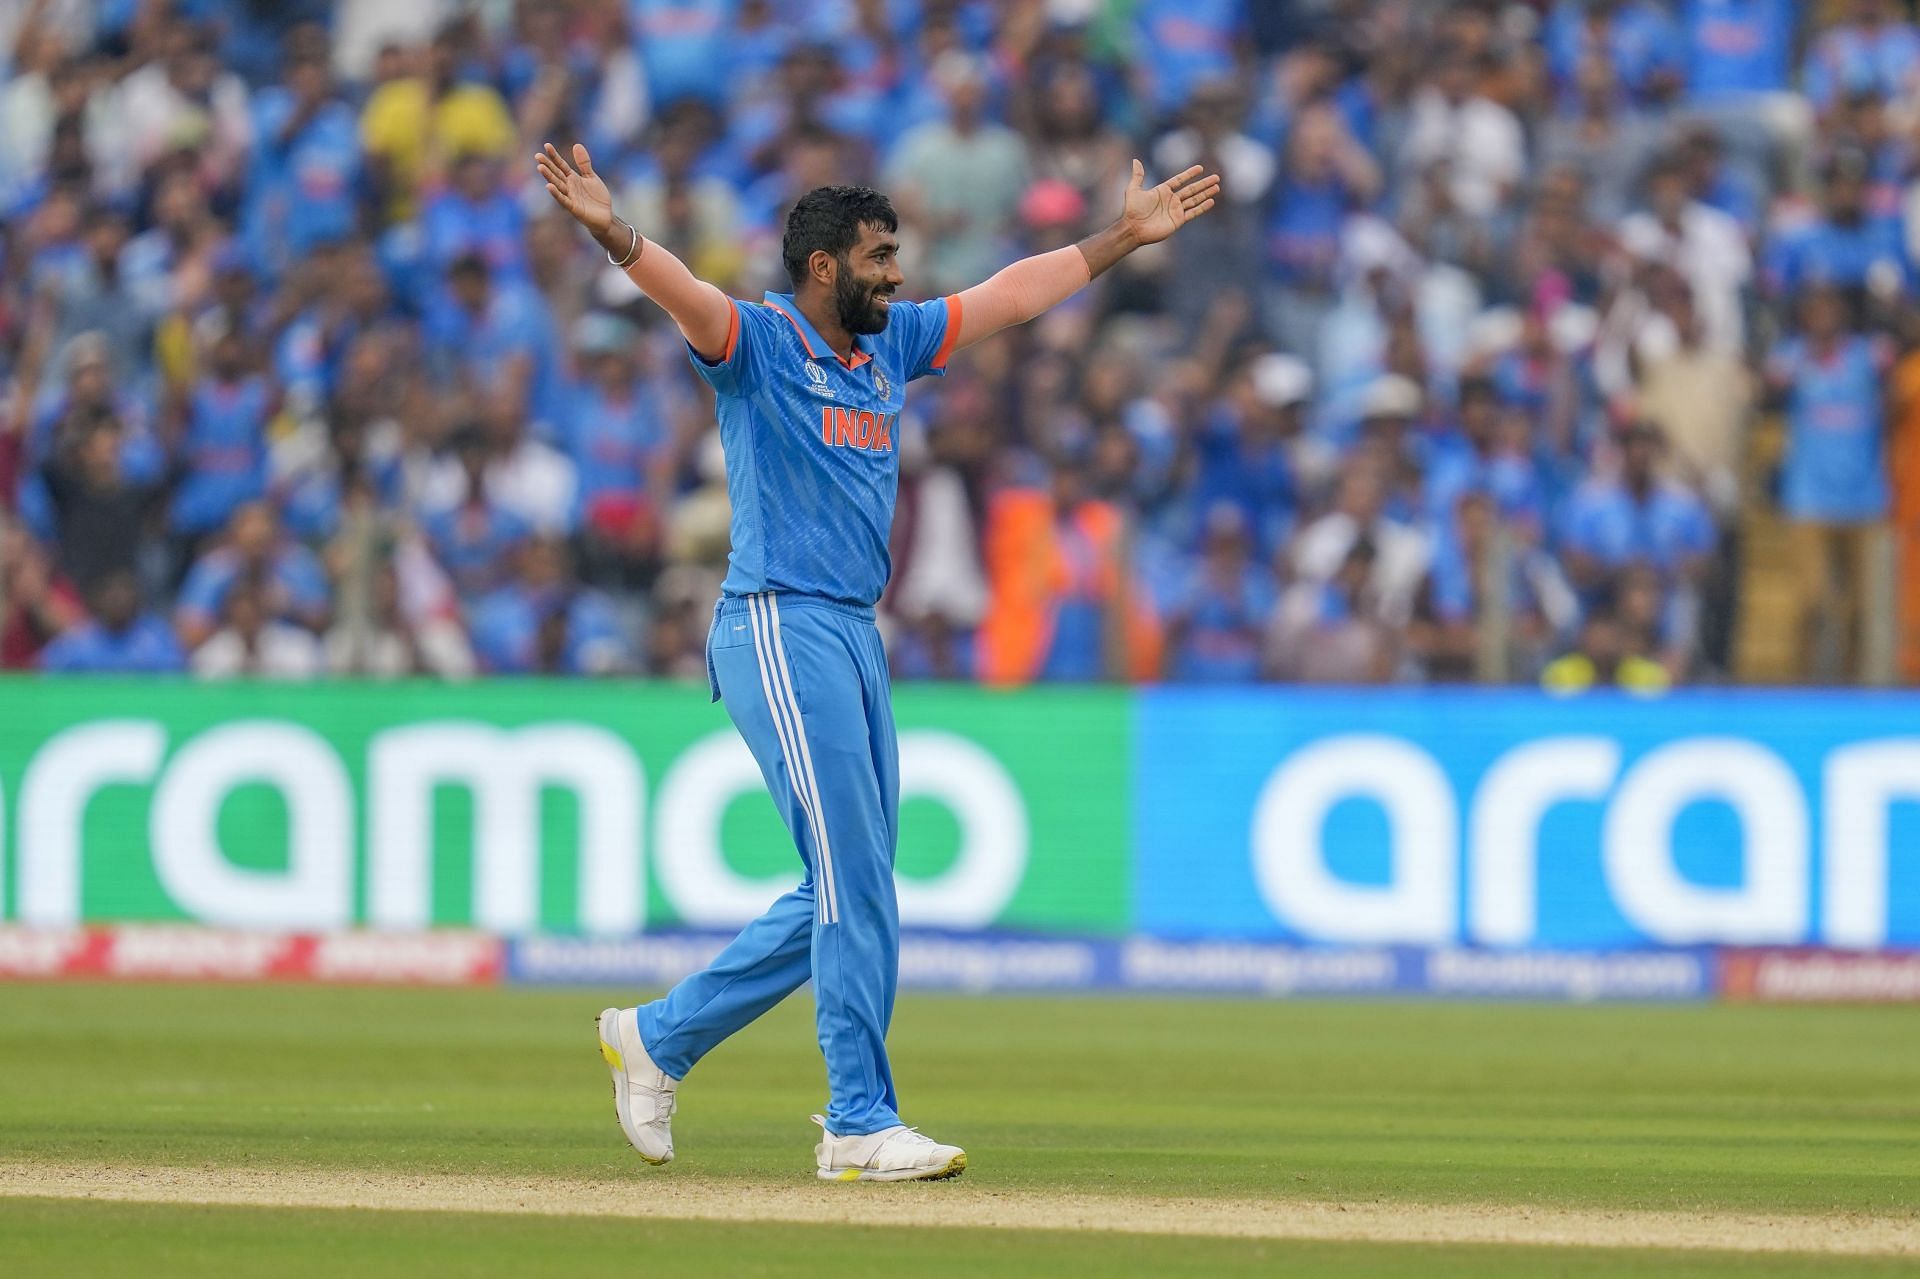 Jasprit Bumrah, with 10 scalps, is currently the second-highest wicket-taker in the ongoing World Cup. [P/C: AP]